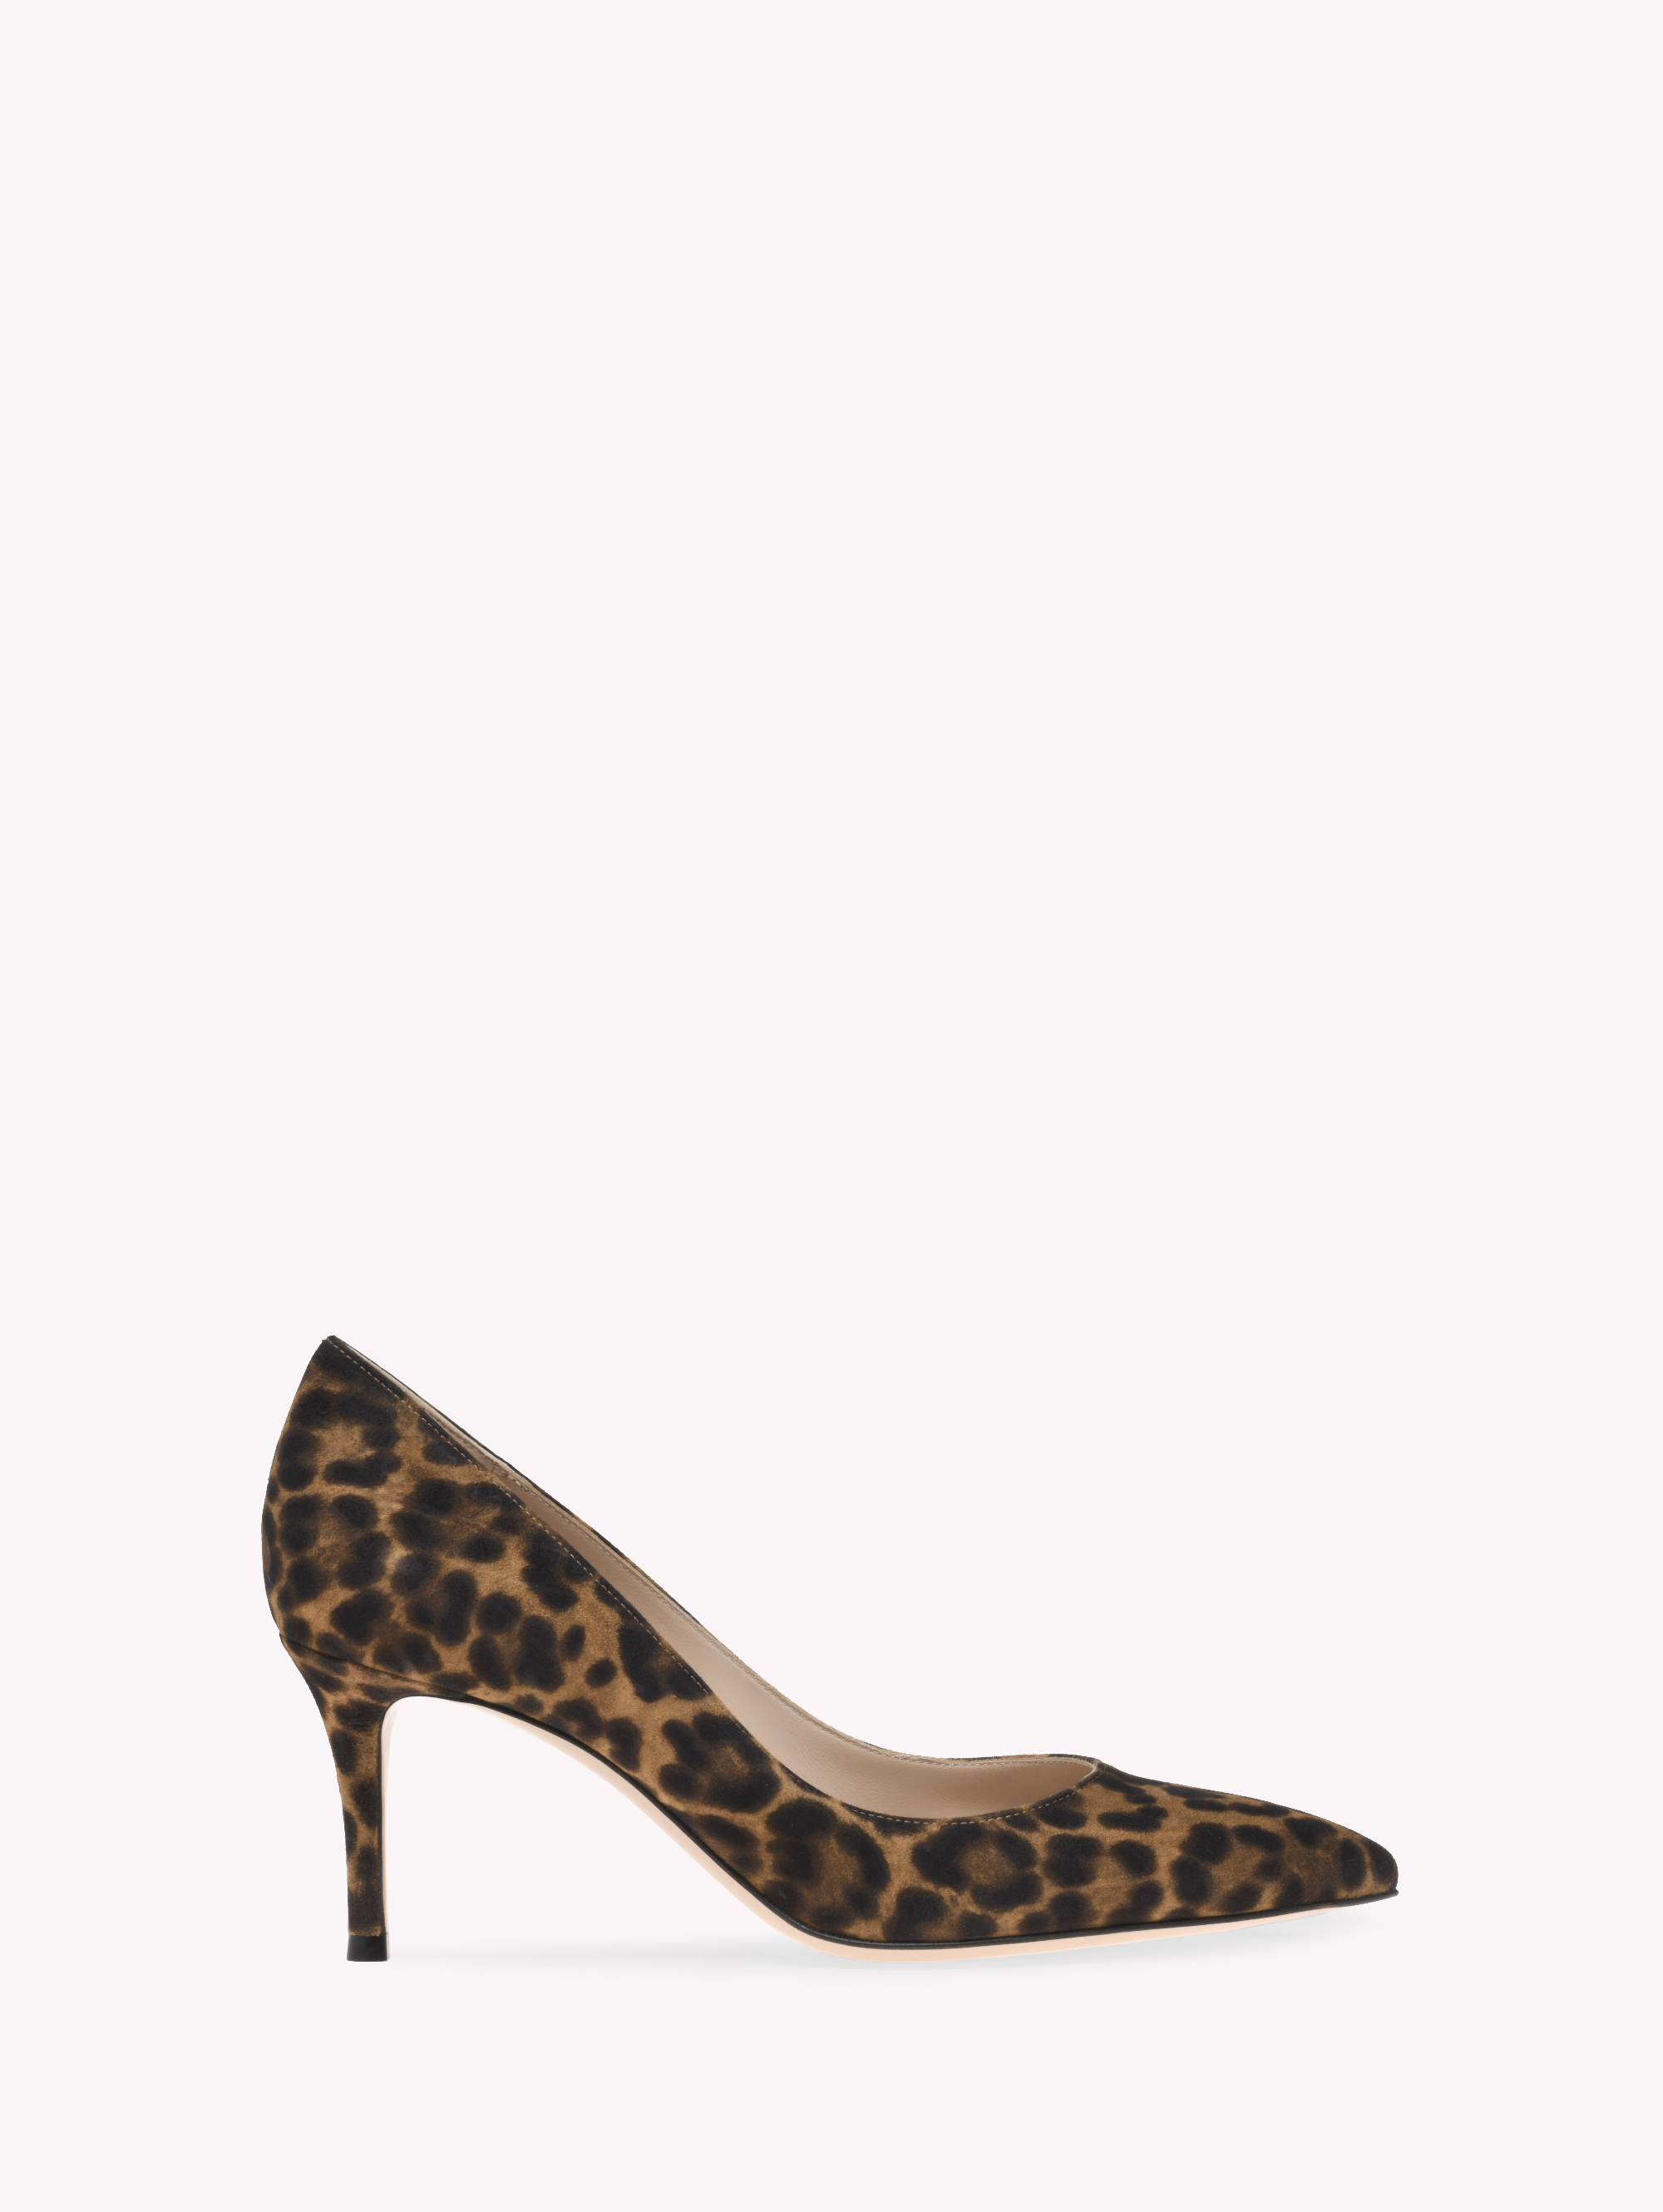 Animal Print Kitten Heel Slingback Shoes | M&S Collection | M&S